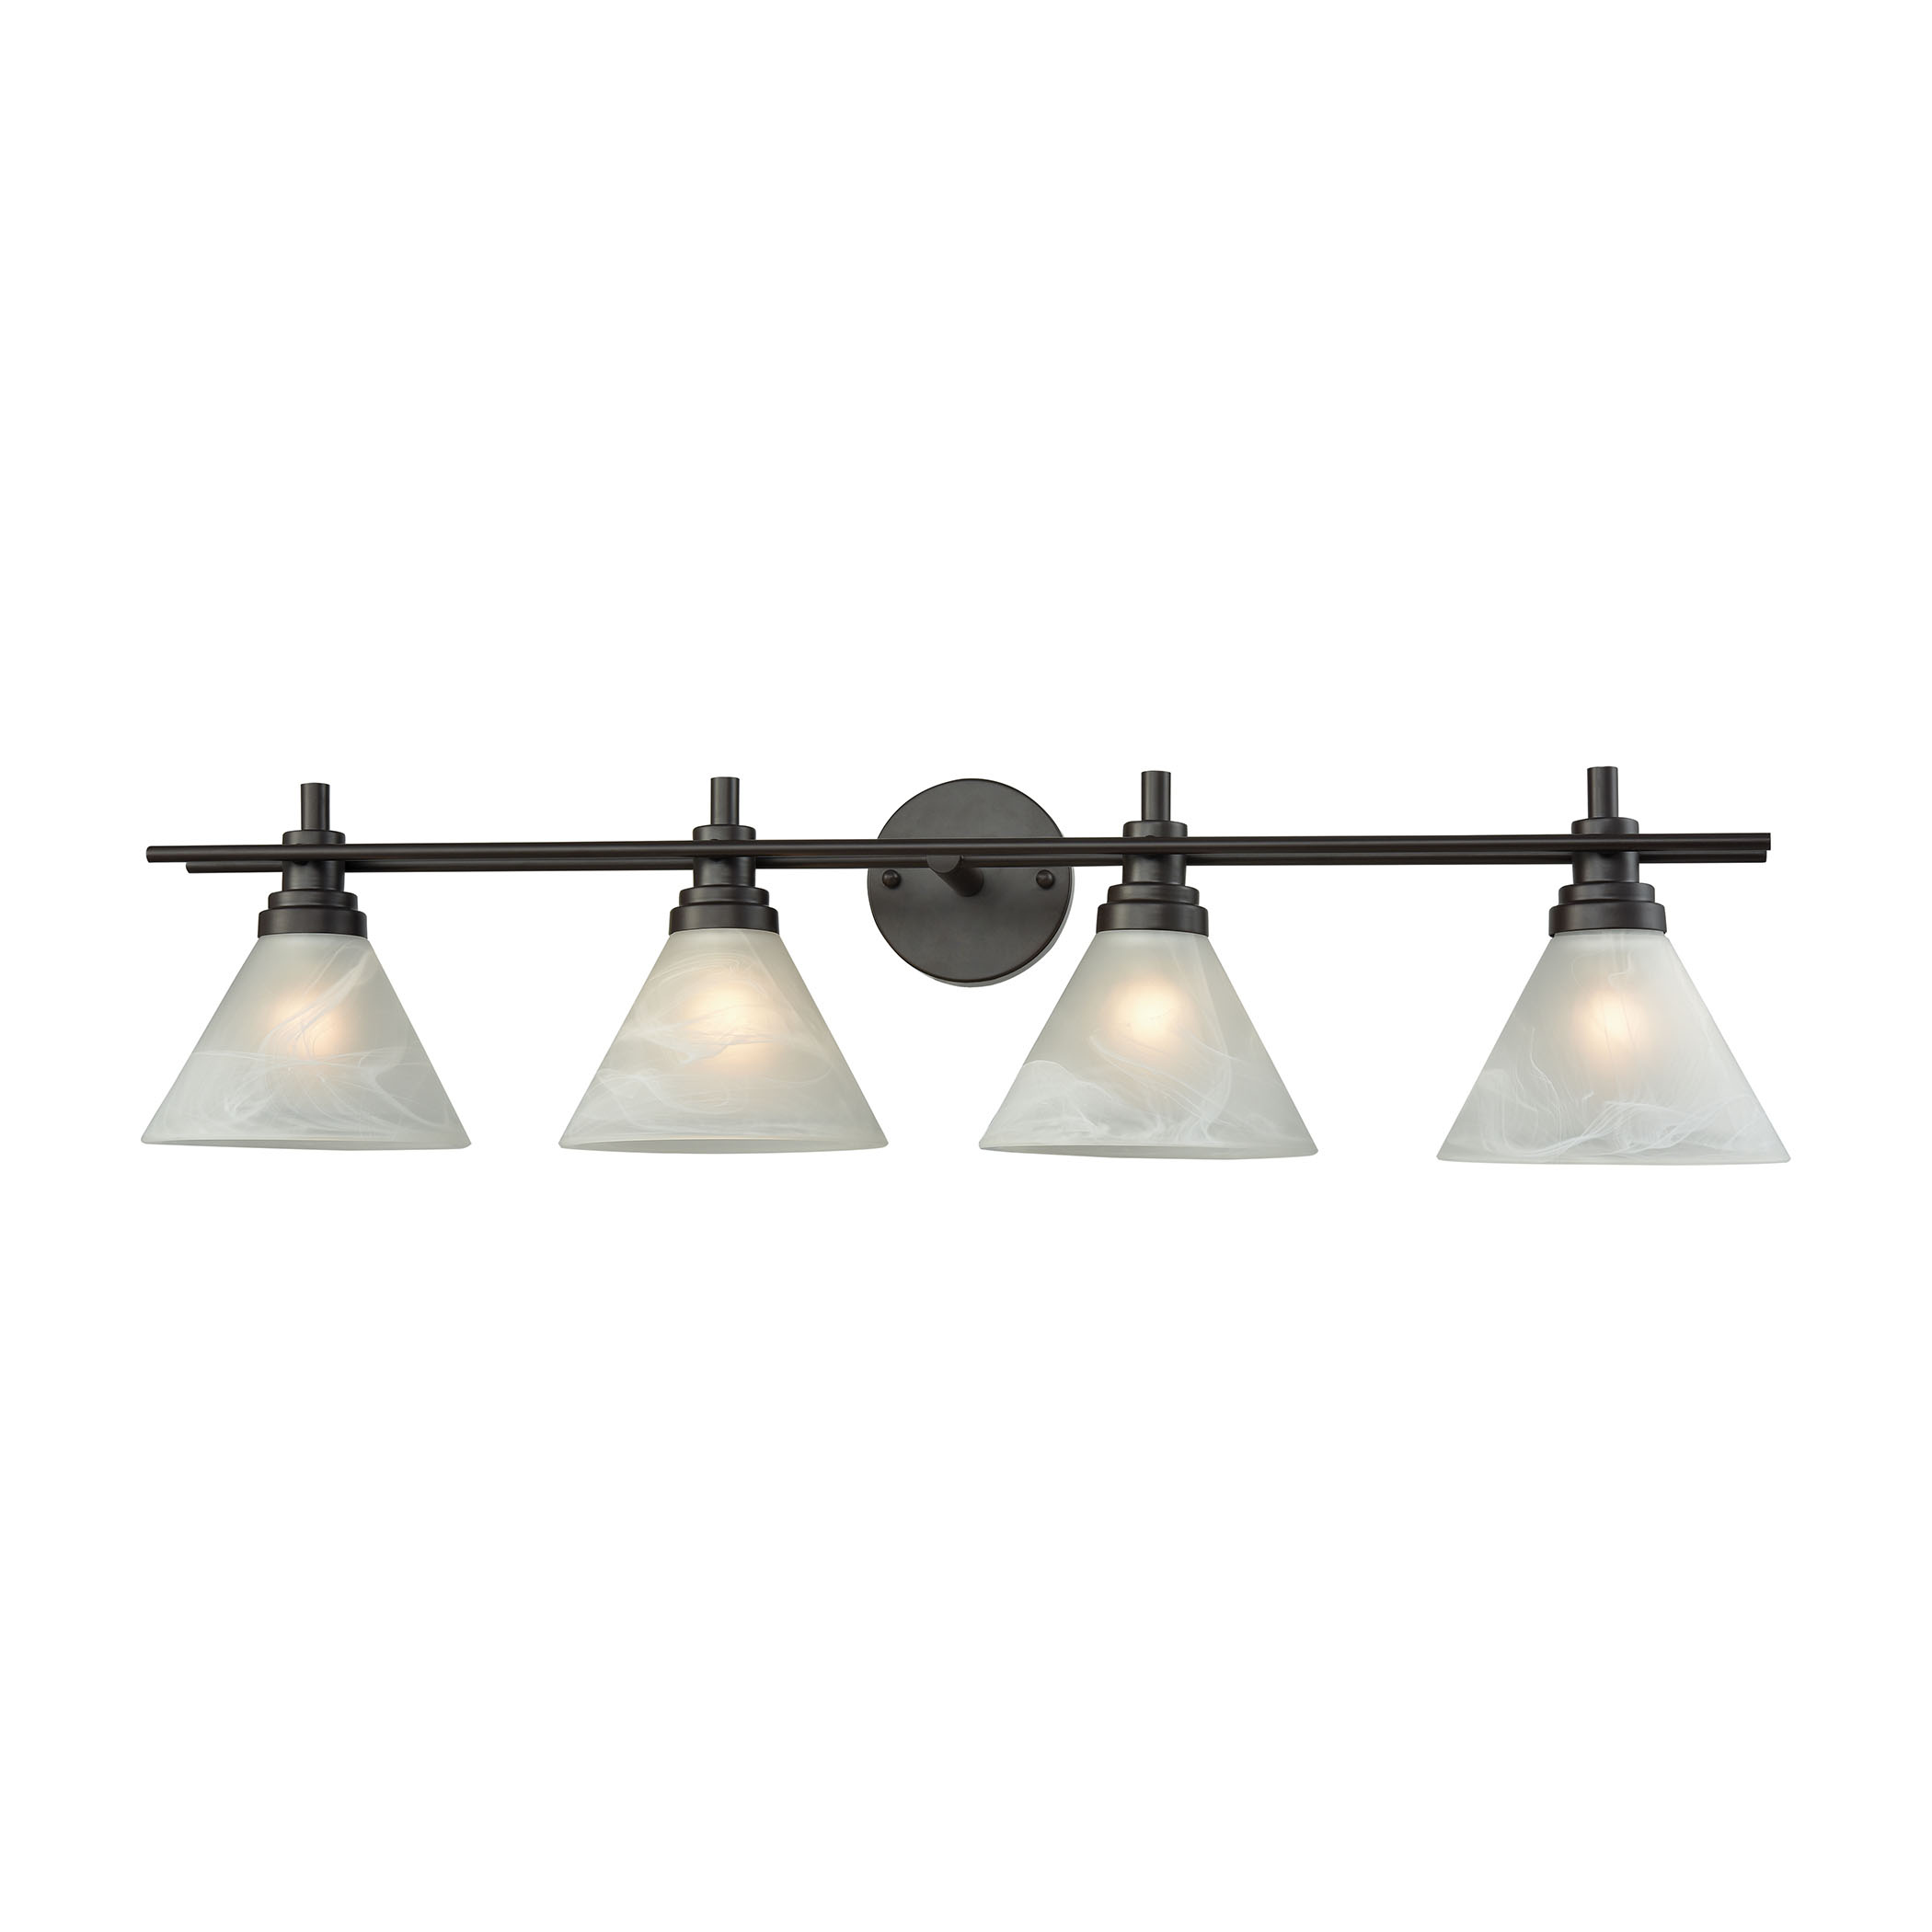 Pemberton 4 Light Vanity in Oil Rubbed Bronze with White Marbleized Glass